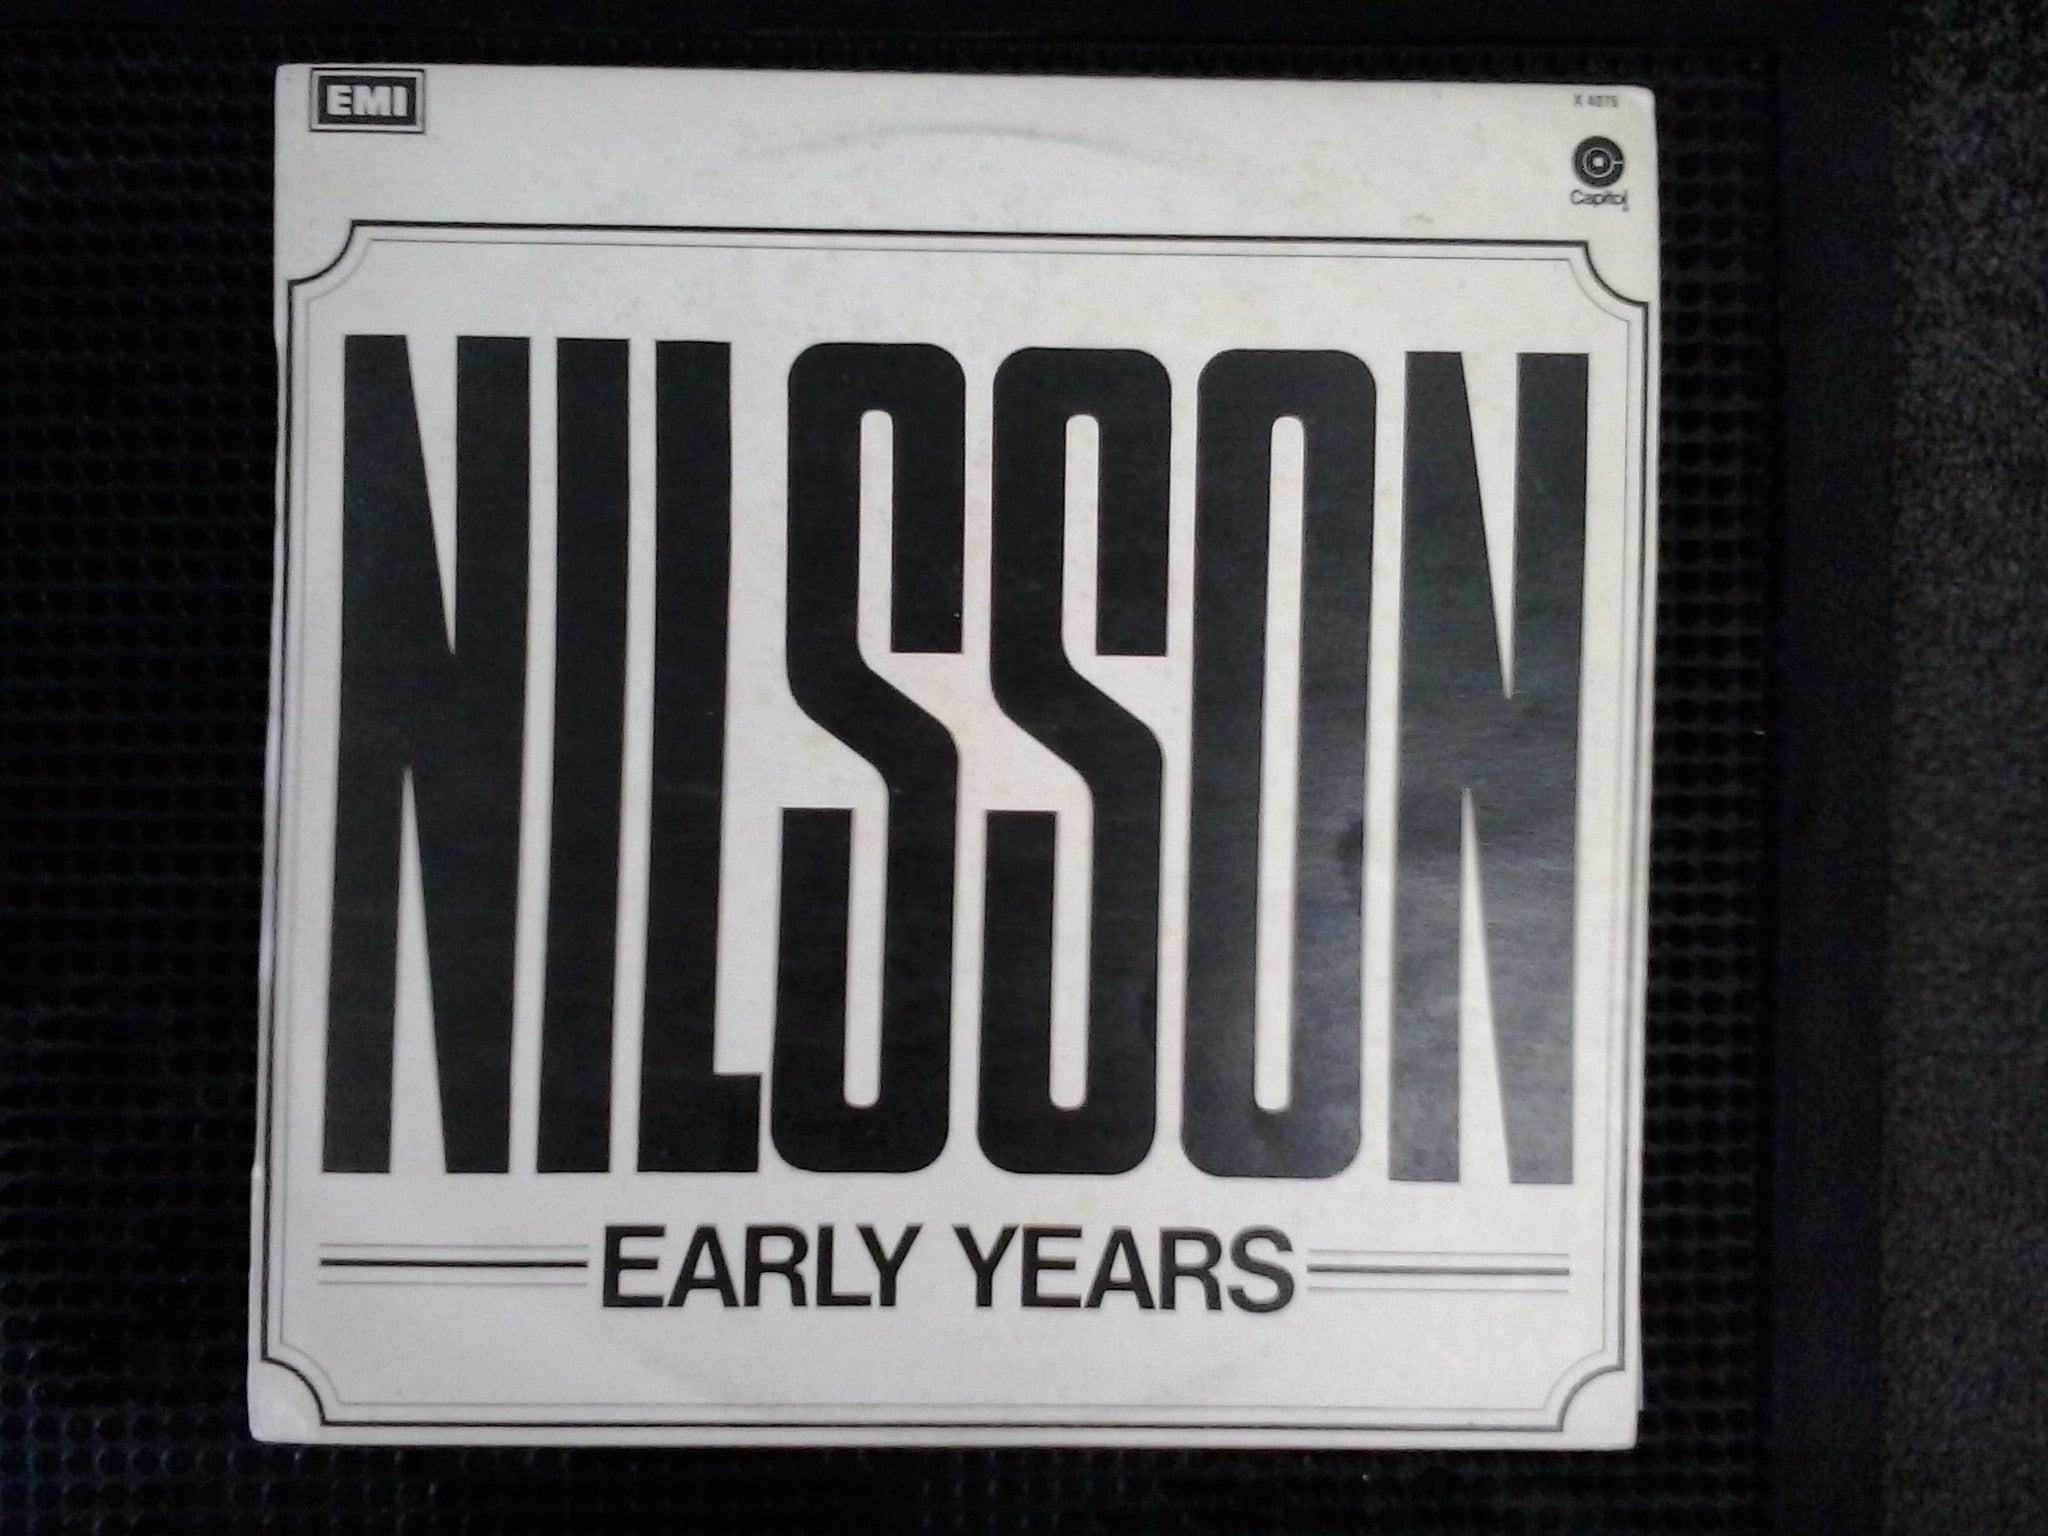 NILSSON-EARLY YEARS LP EX COVER VG